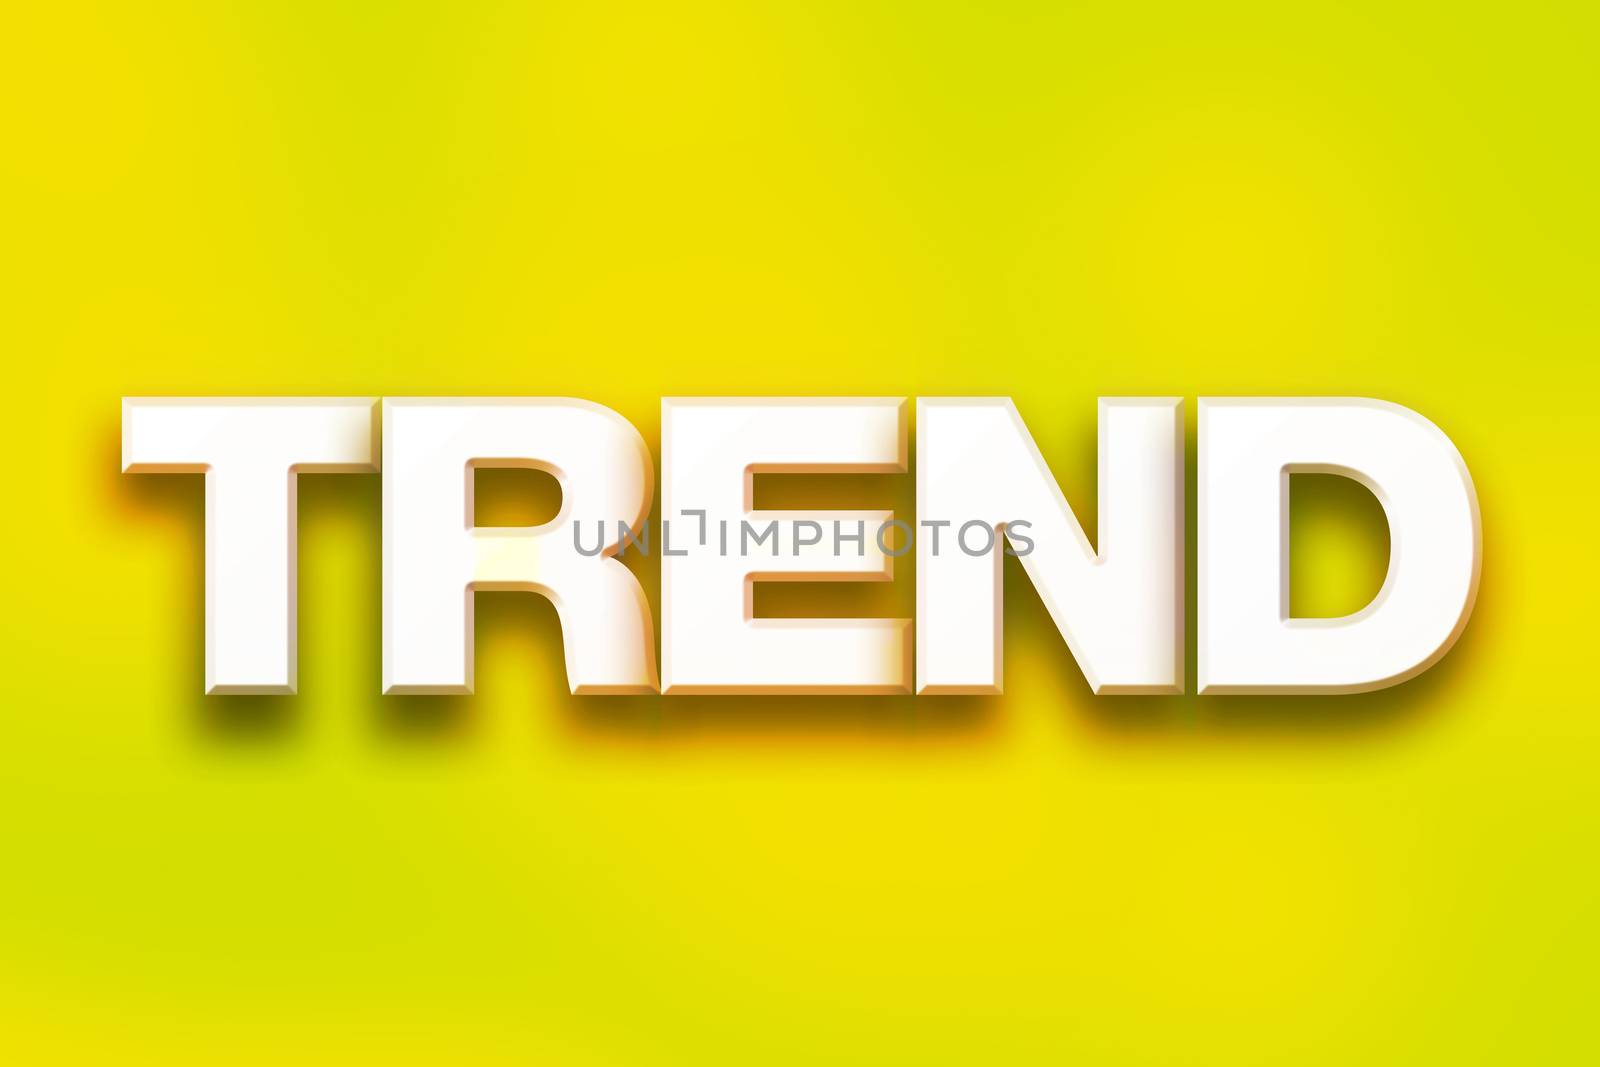 The word "Trend" written in white 3D letters on a colorful background concept and theme.